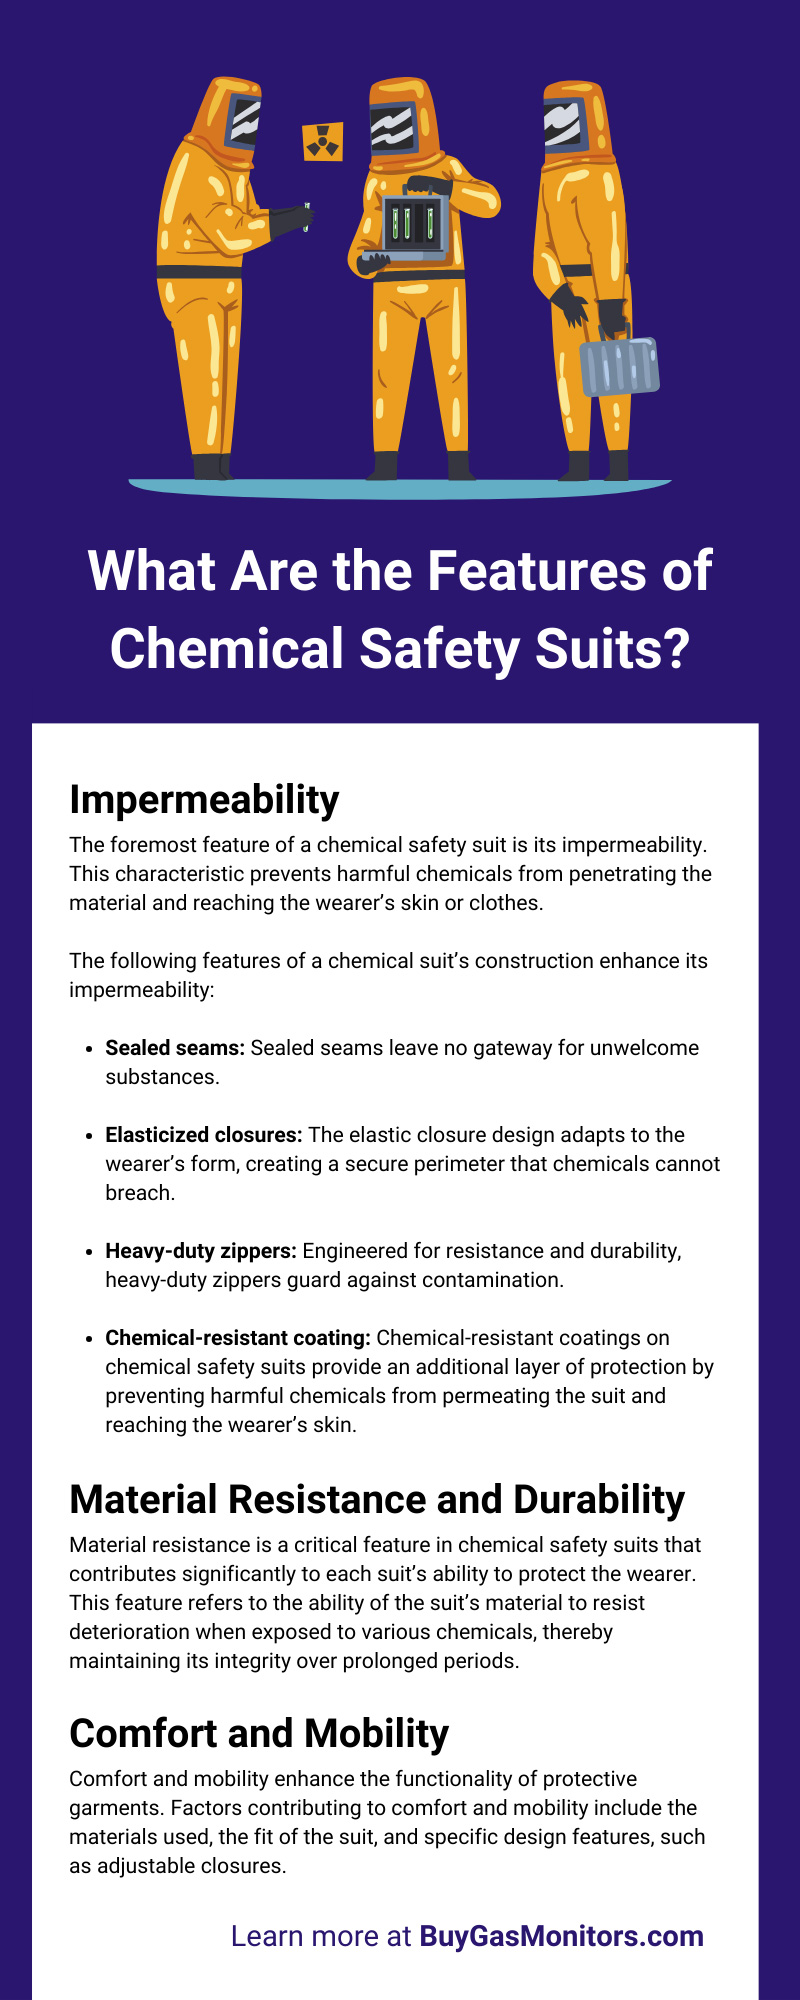 What Are the Features of Chemical Safety Suits?